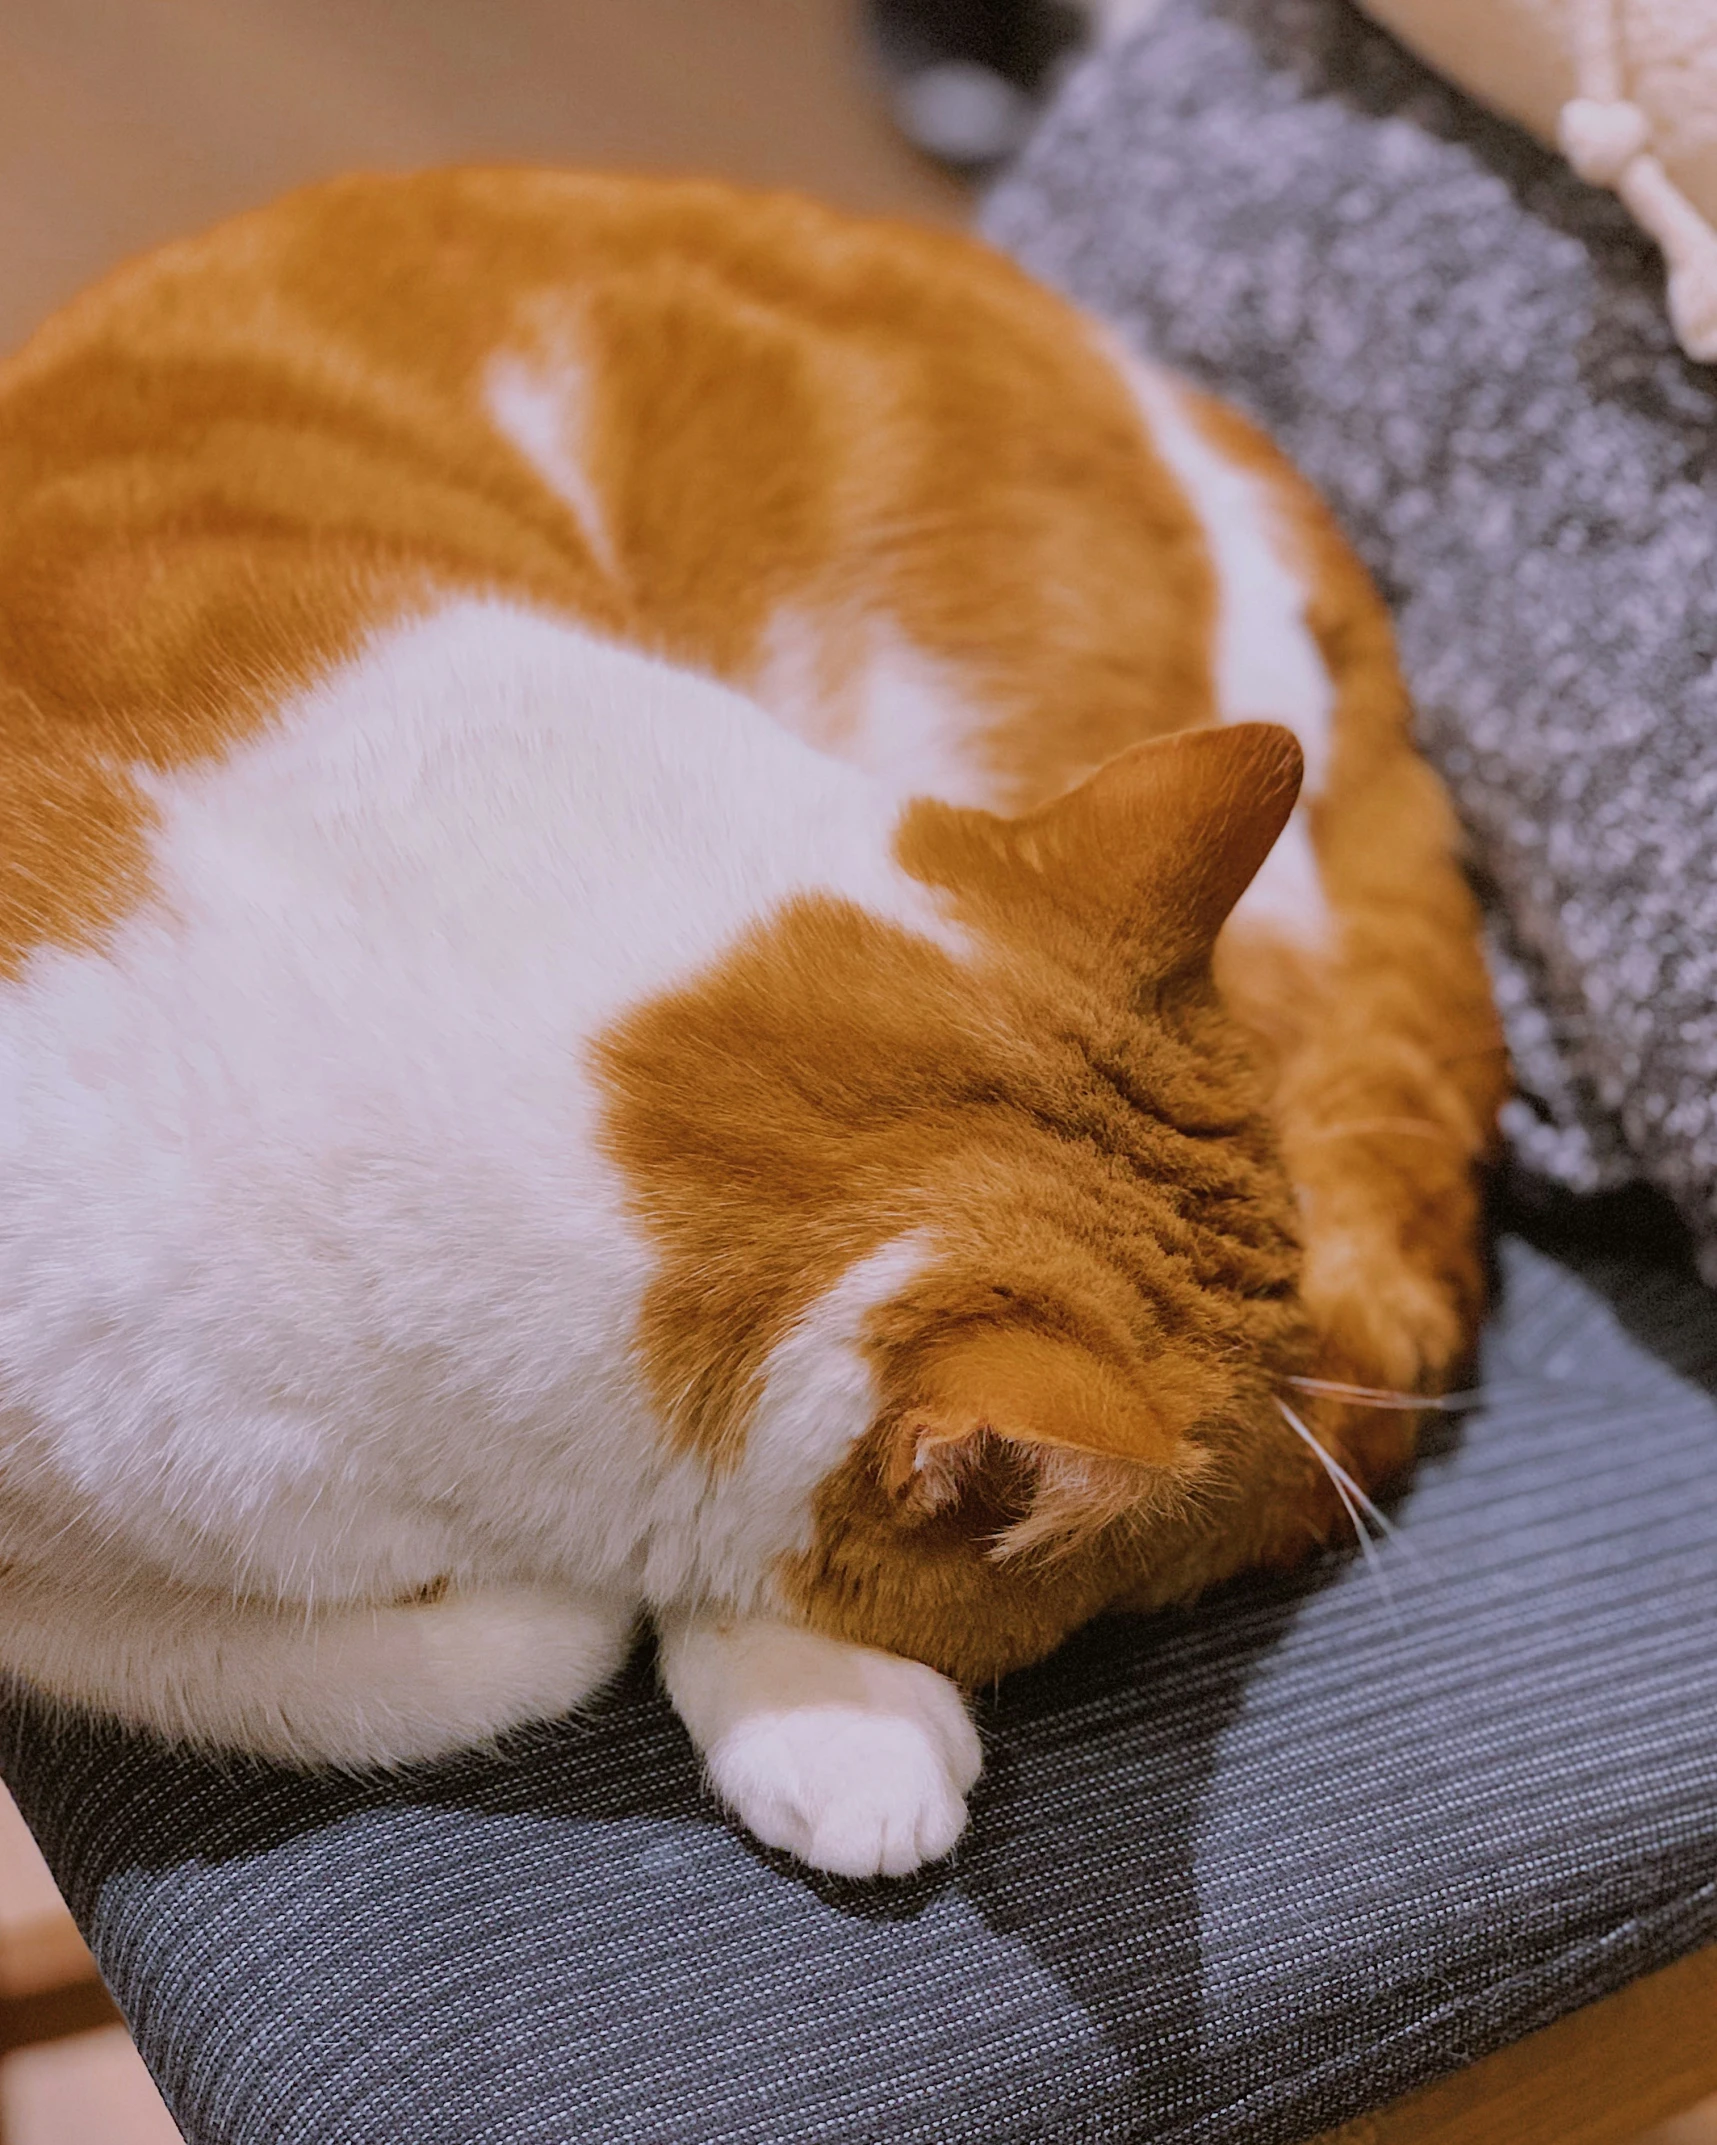 a fat orange and white cat sleeps on a bed